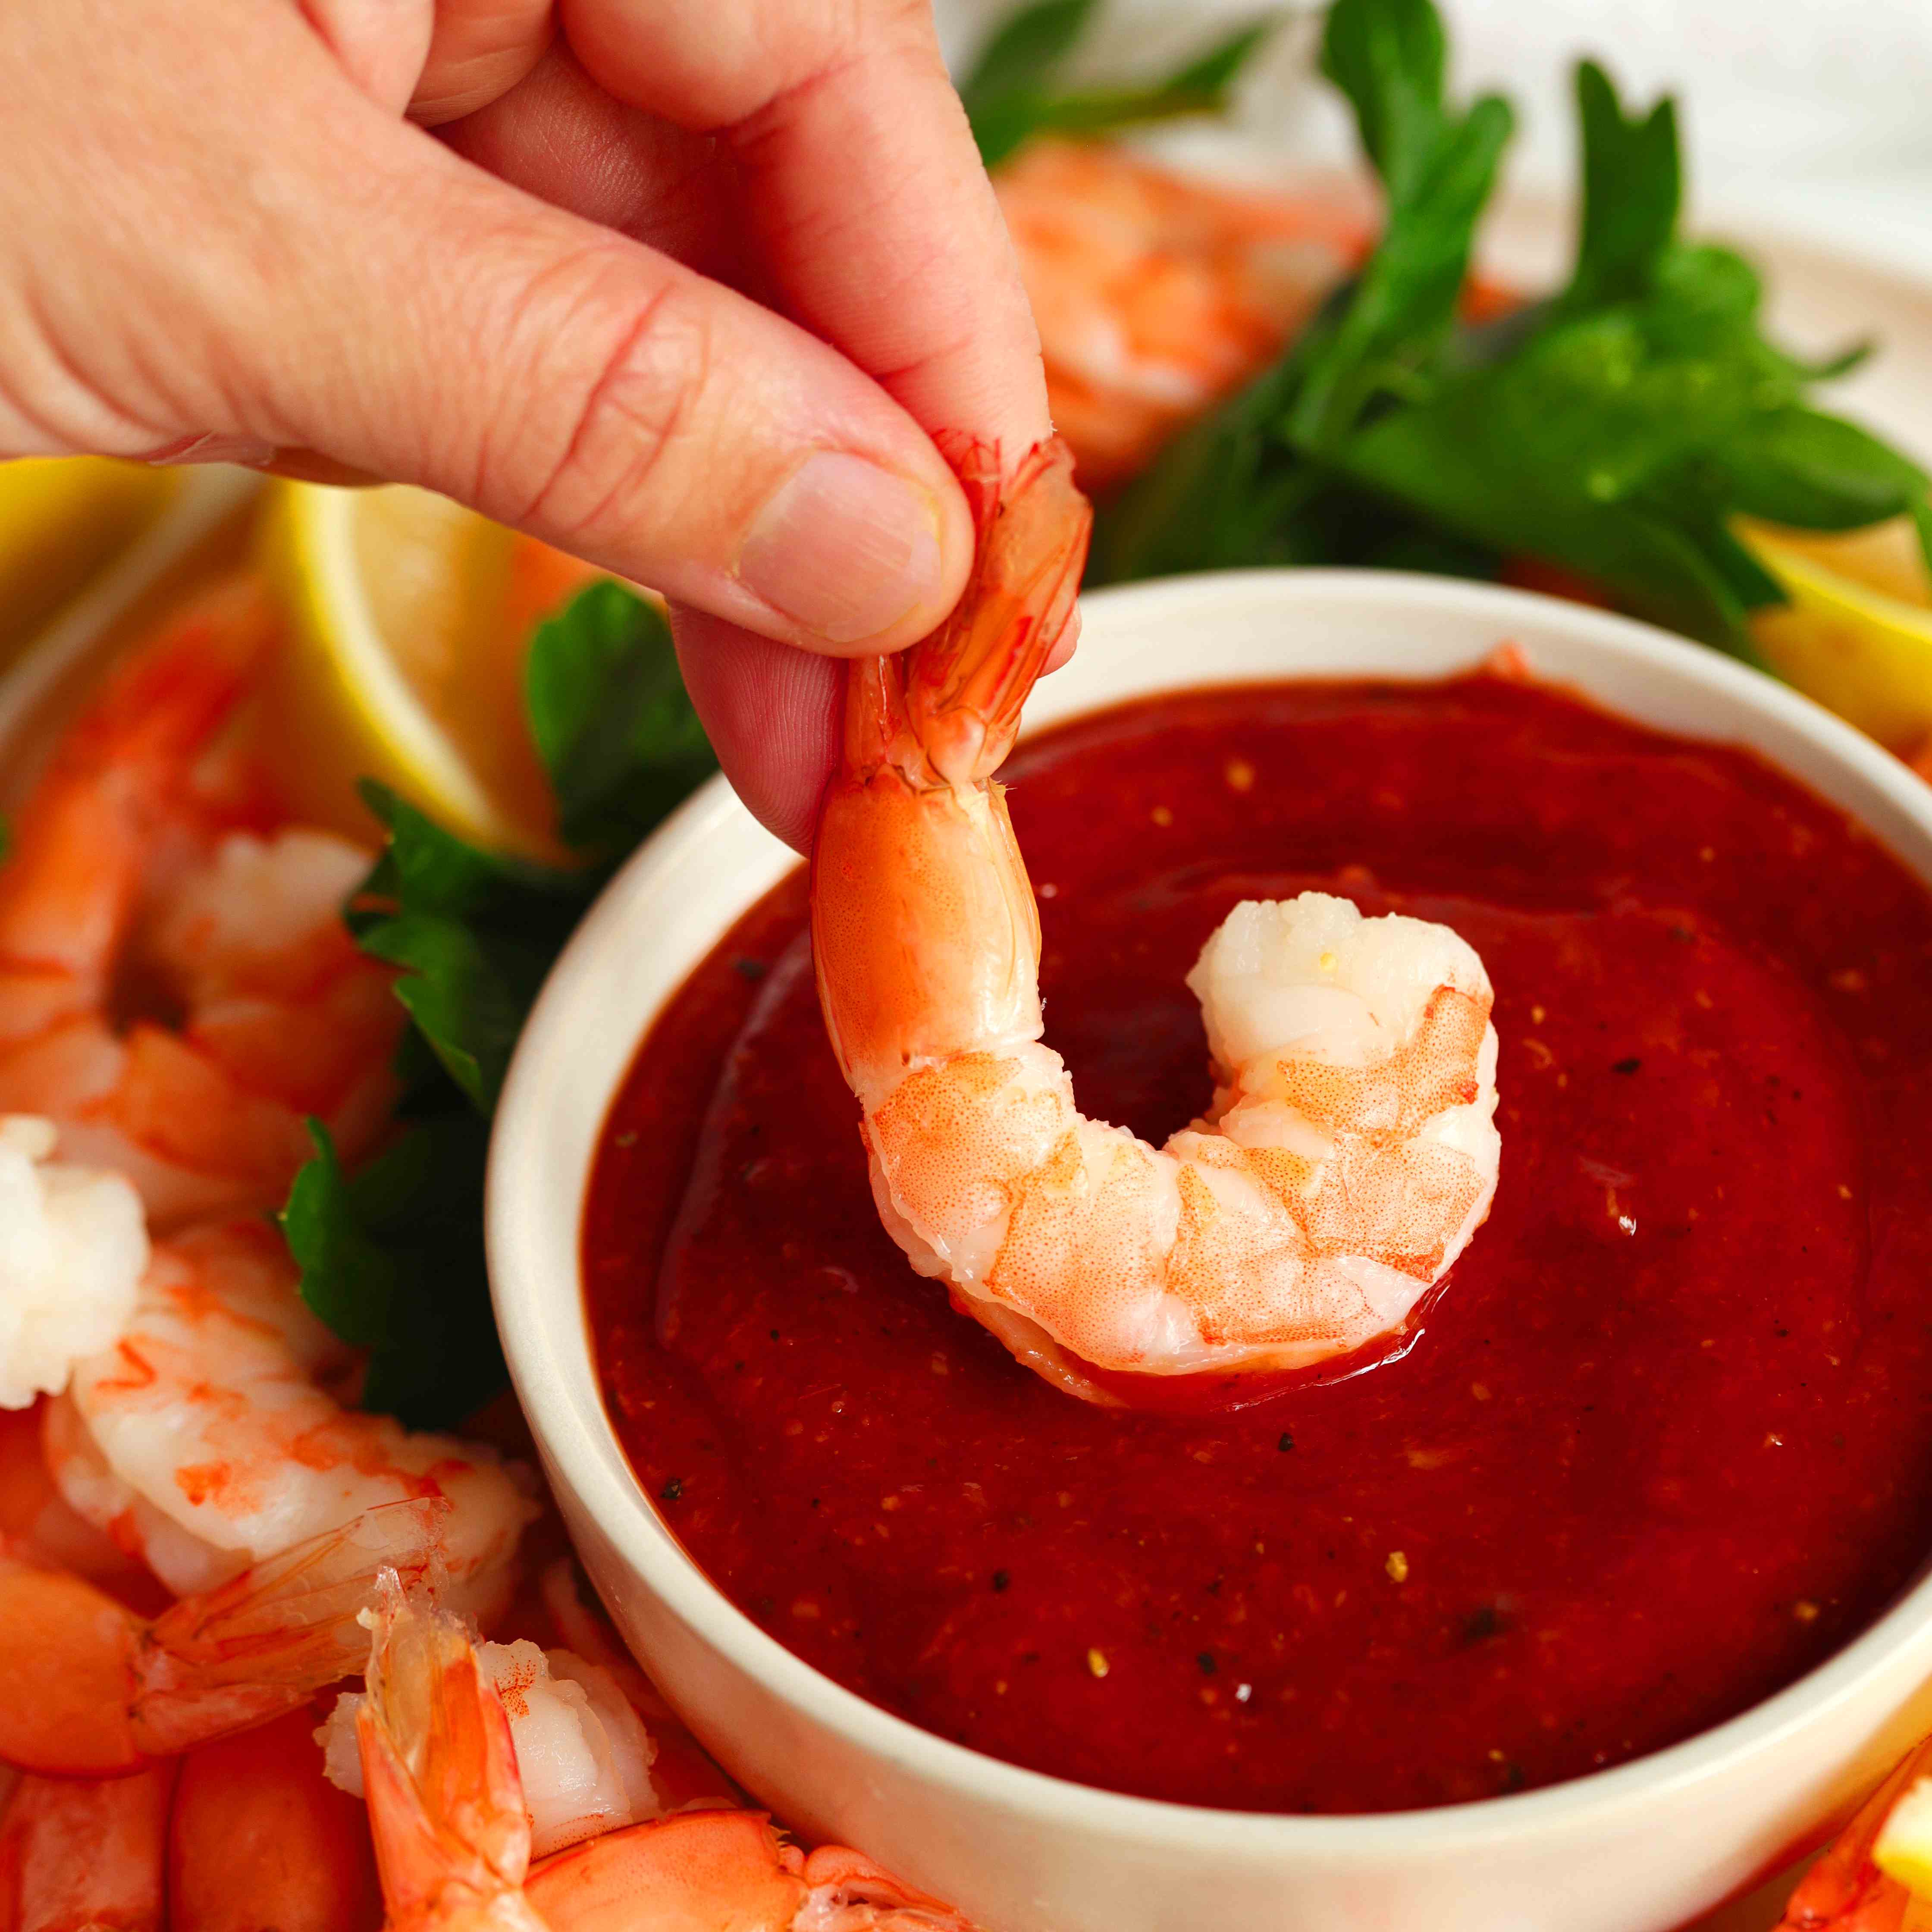 Shrimp being dipped in cocktail sauce